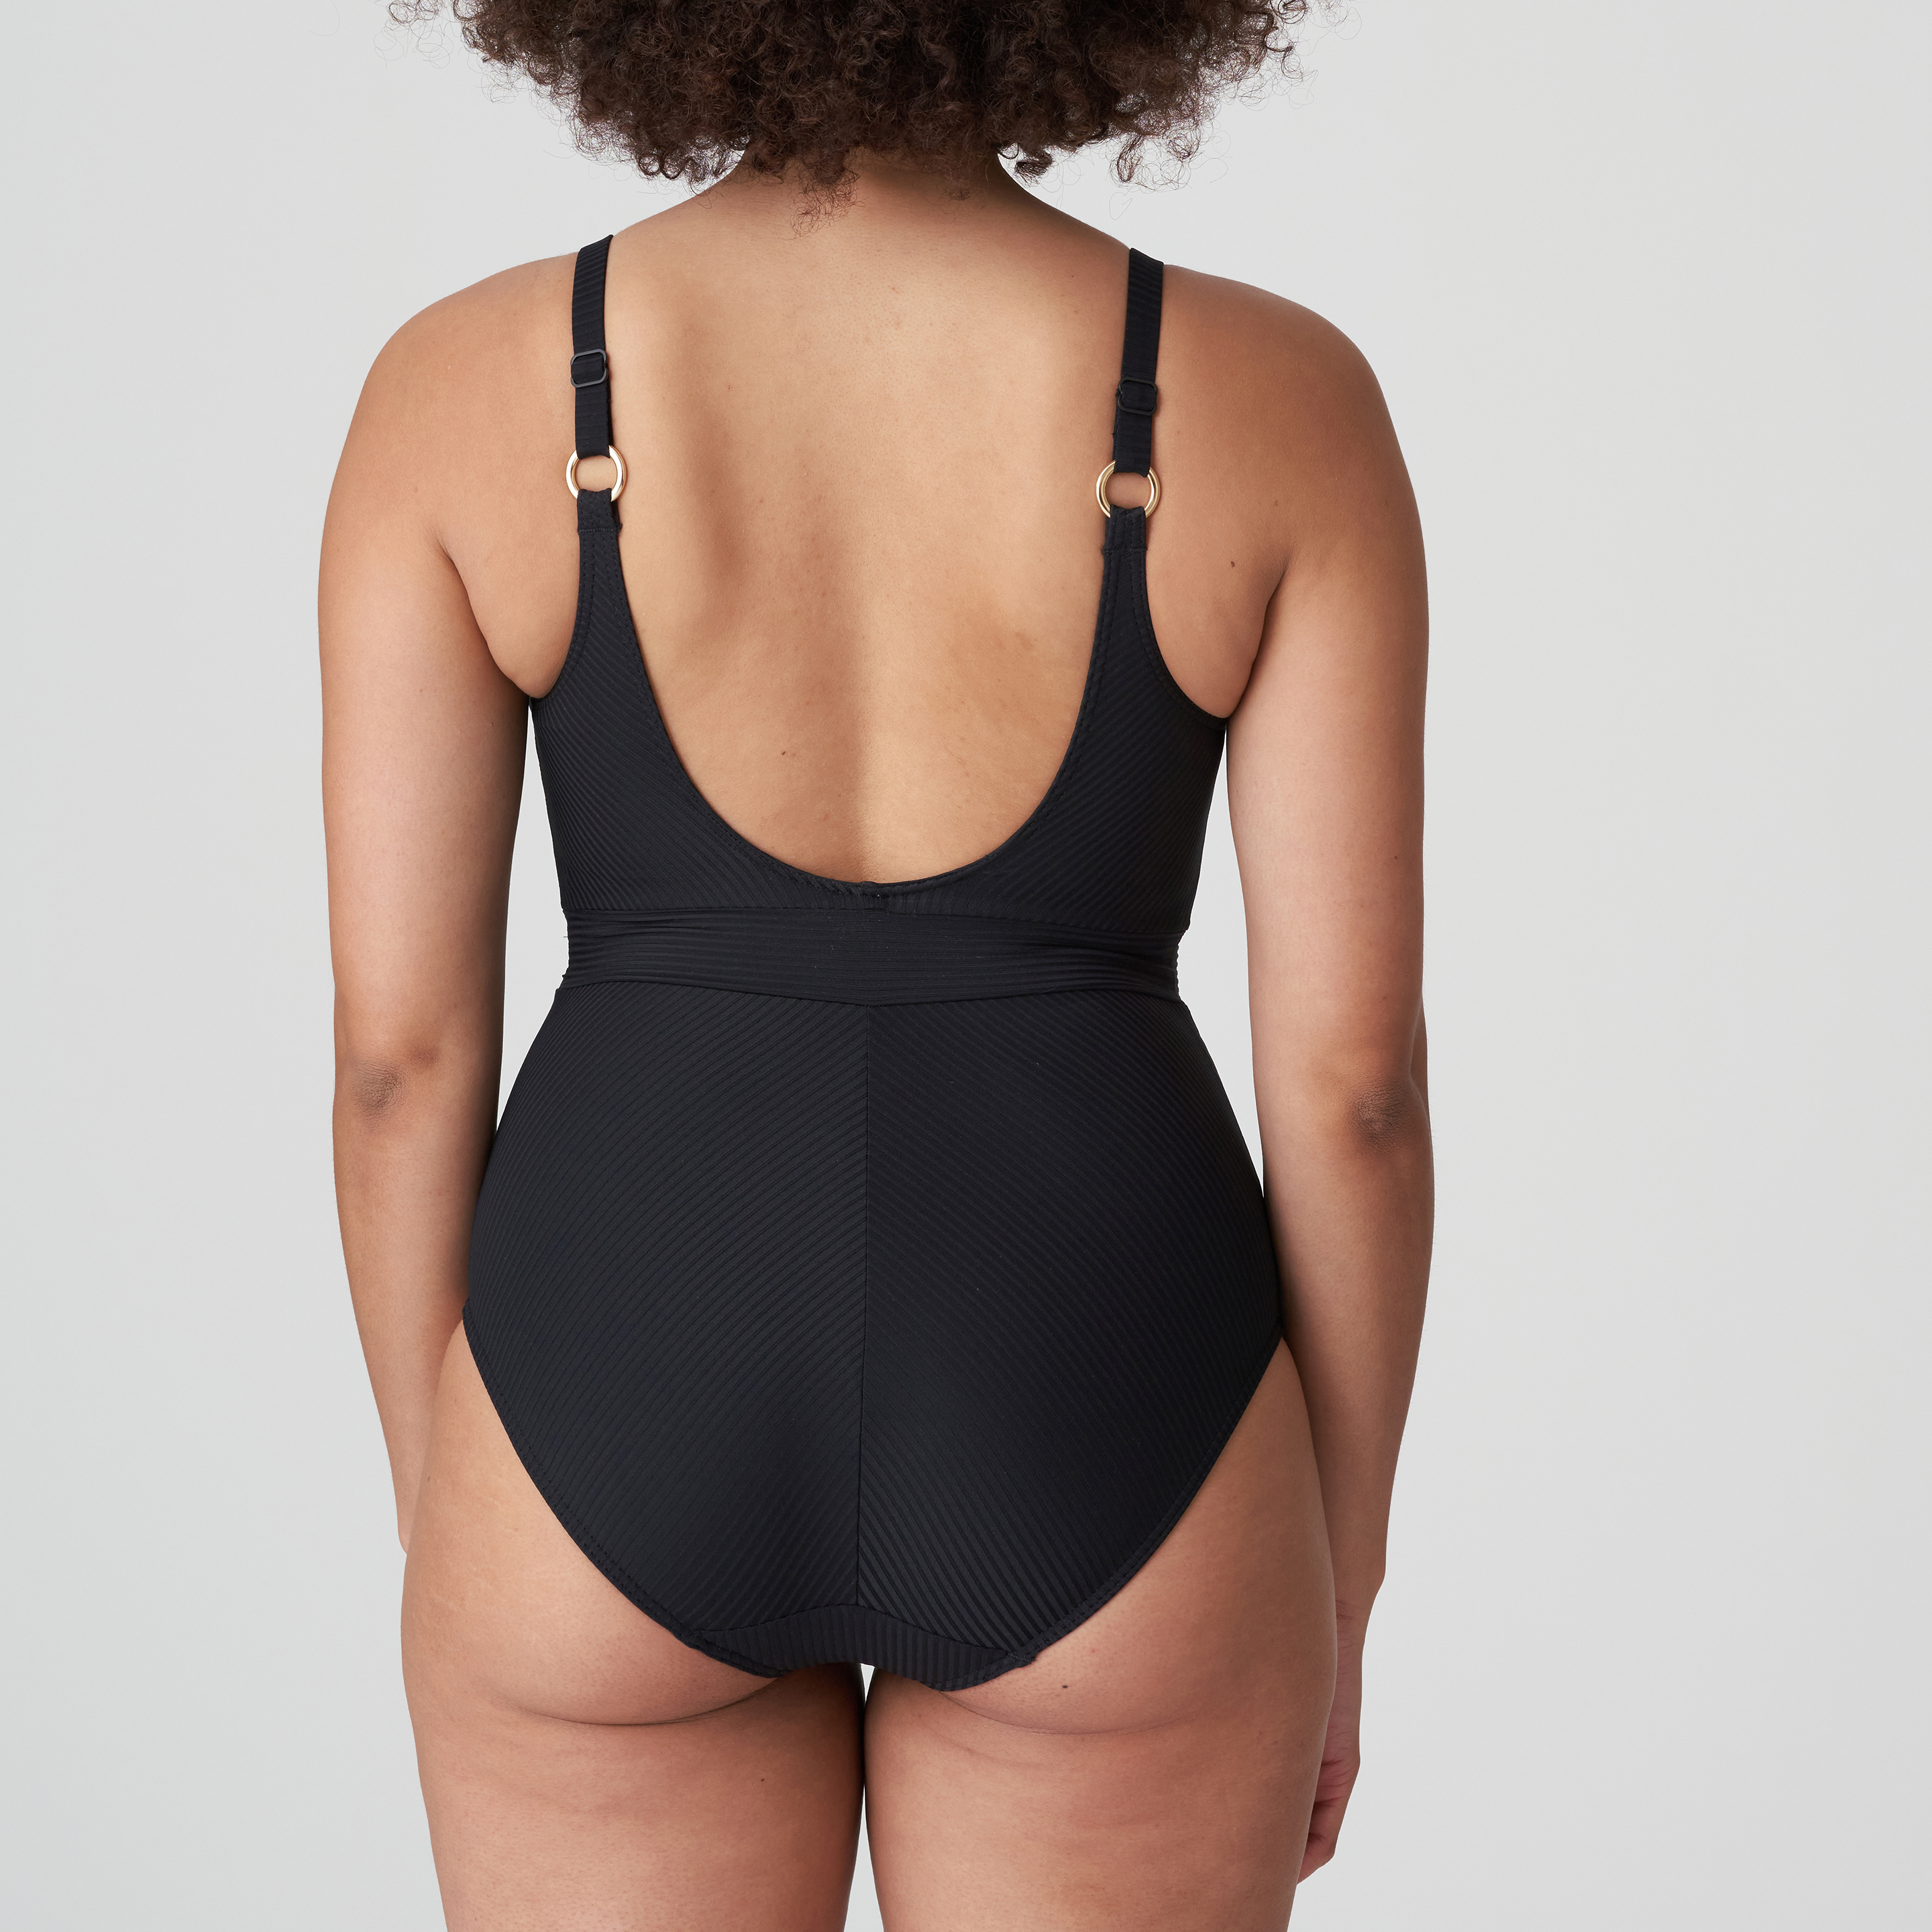 Underwired padded swimsuit